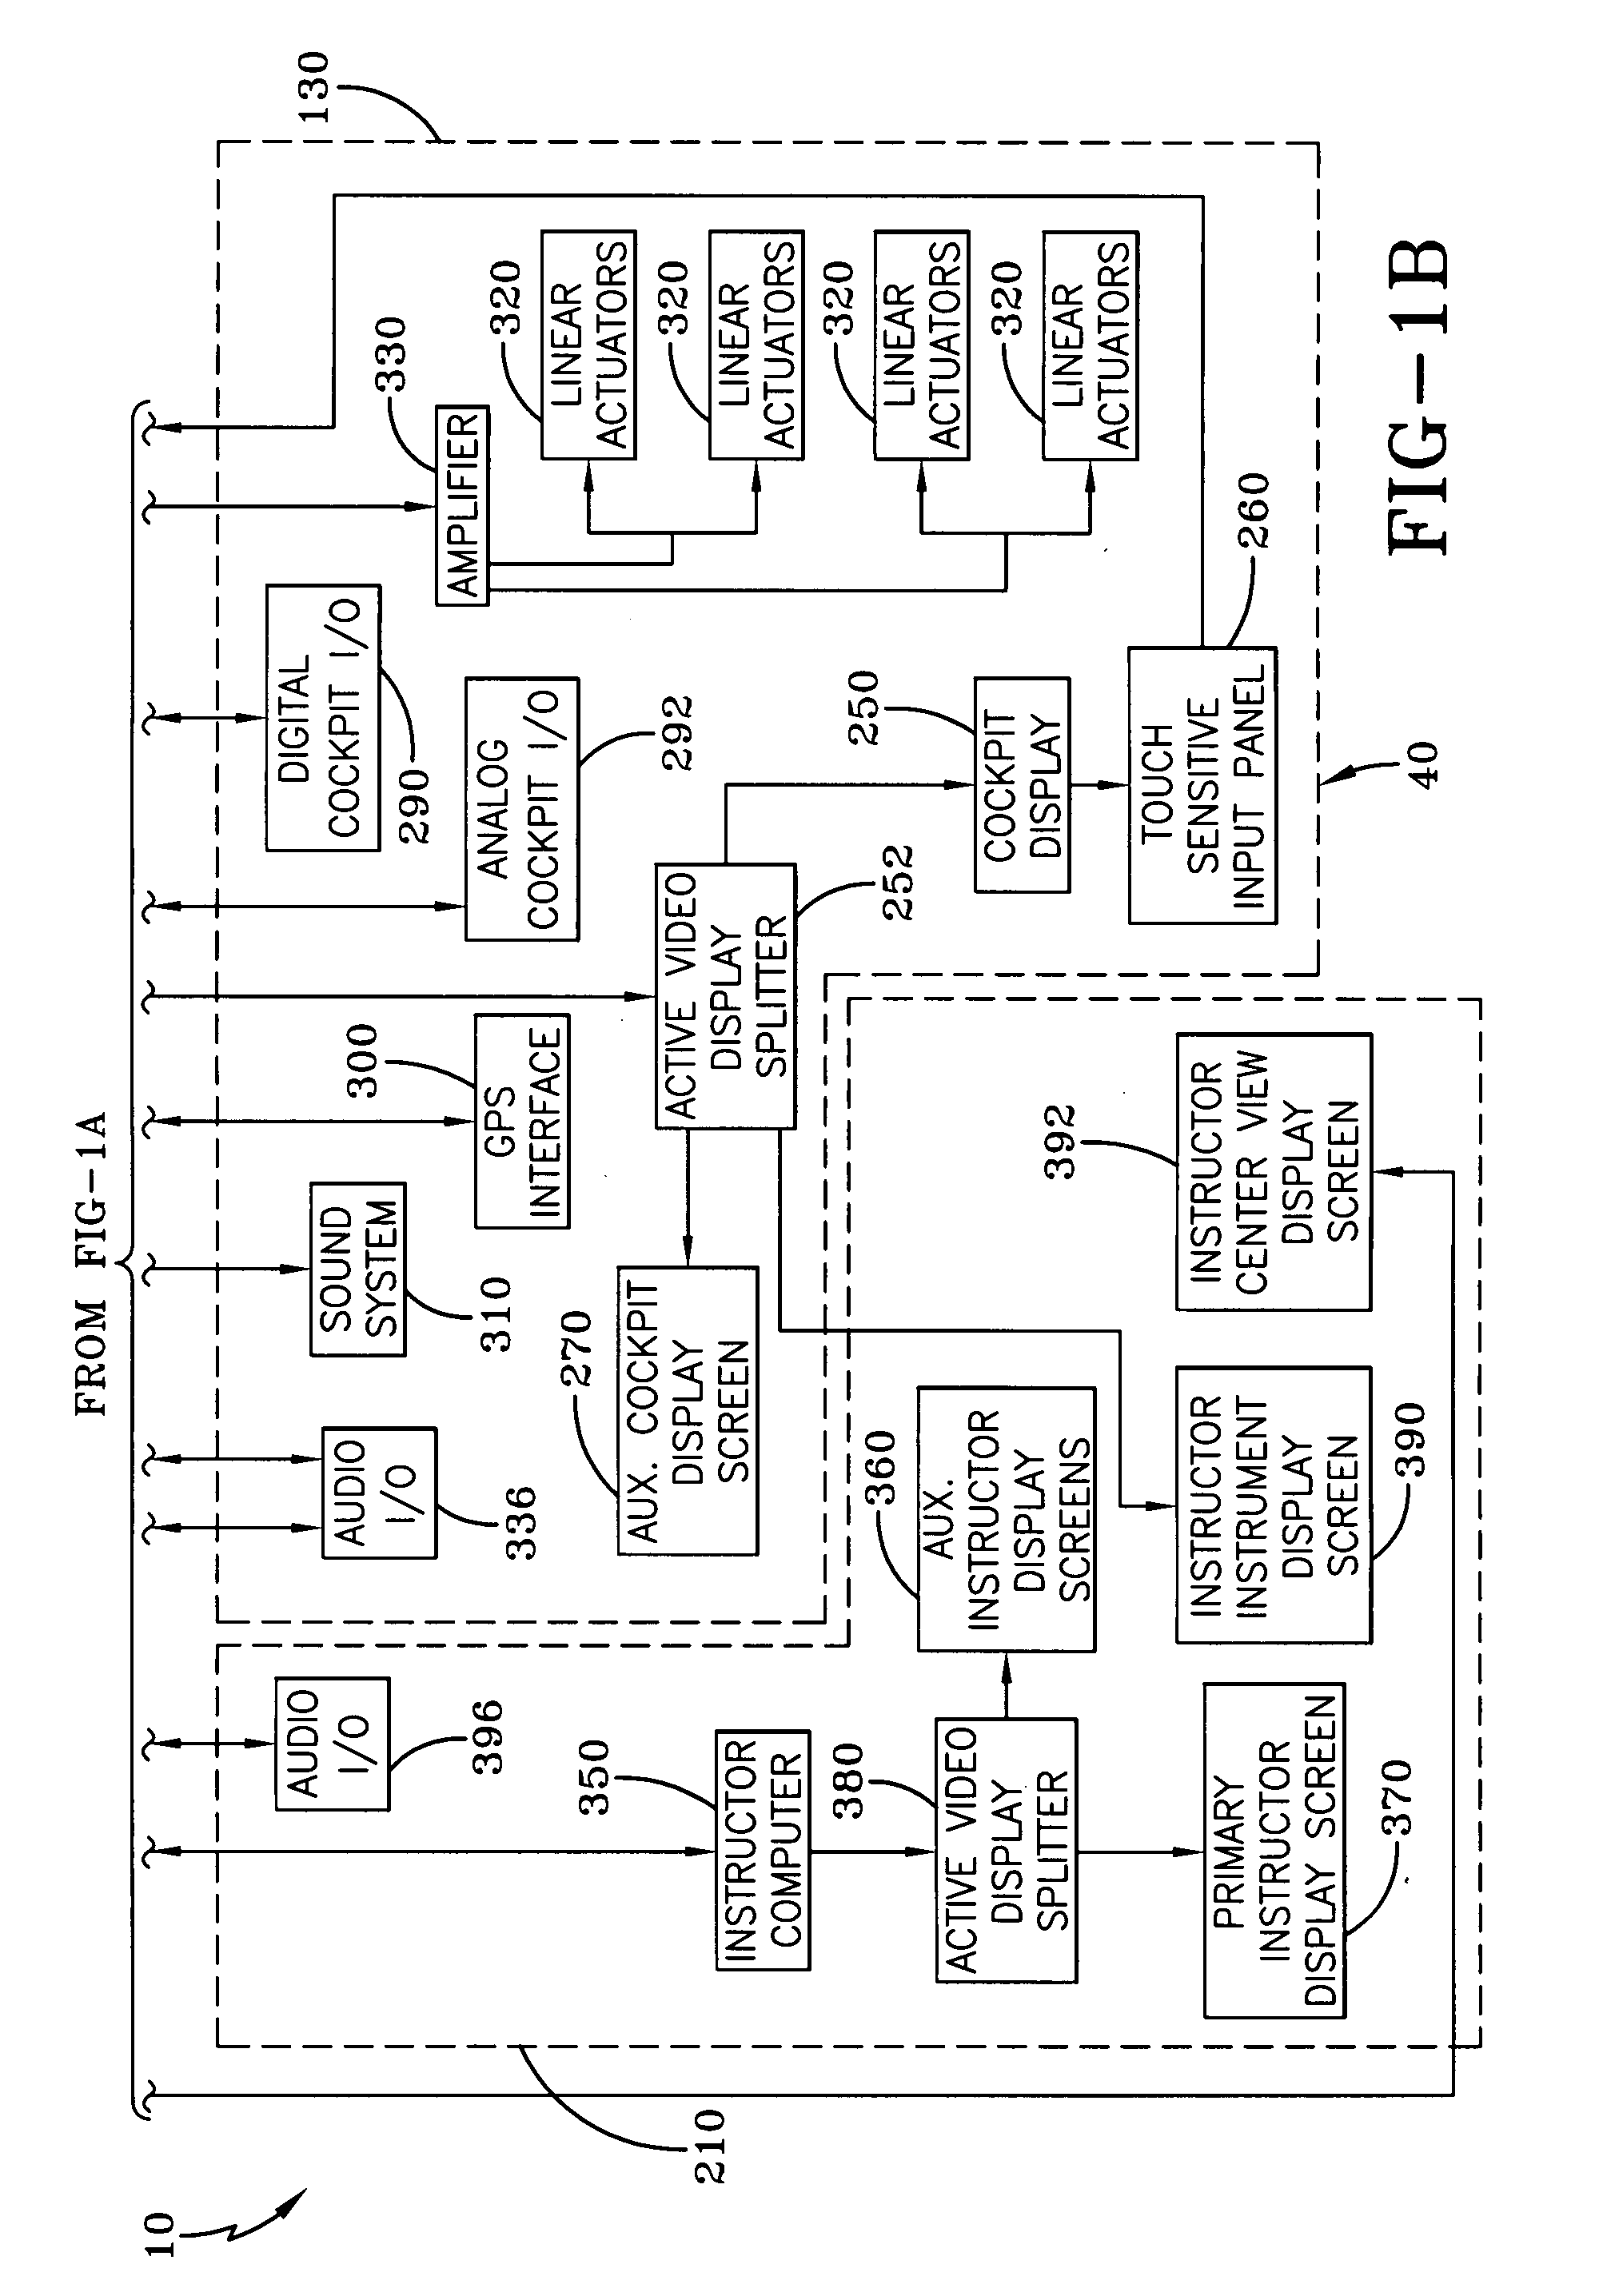 Immersive video projection system and associated video image rendering system for a virtual reality simulator